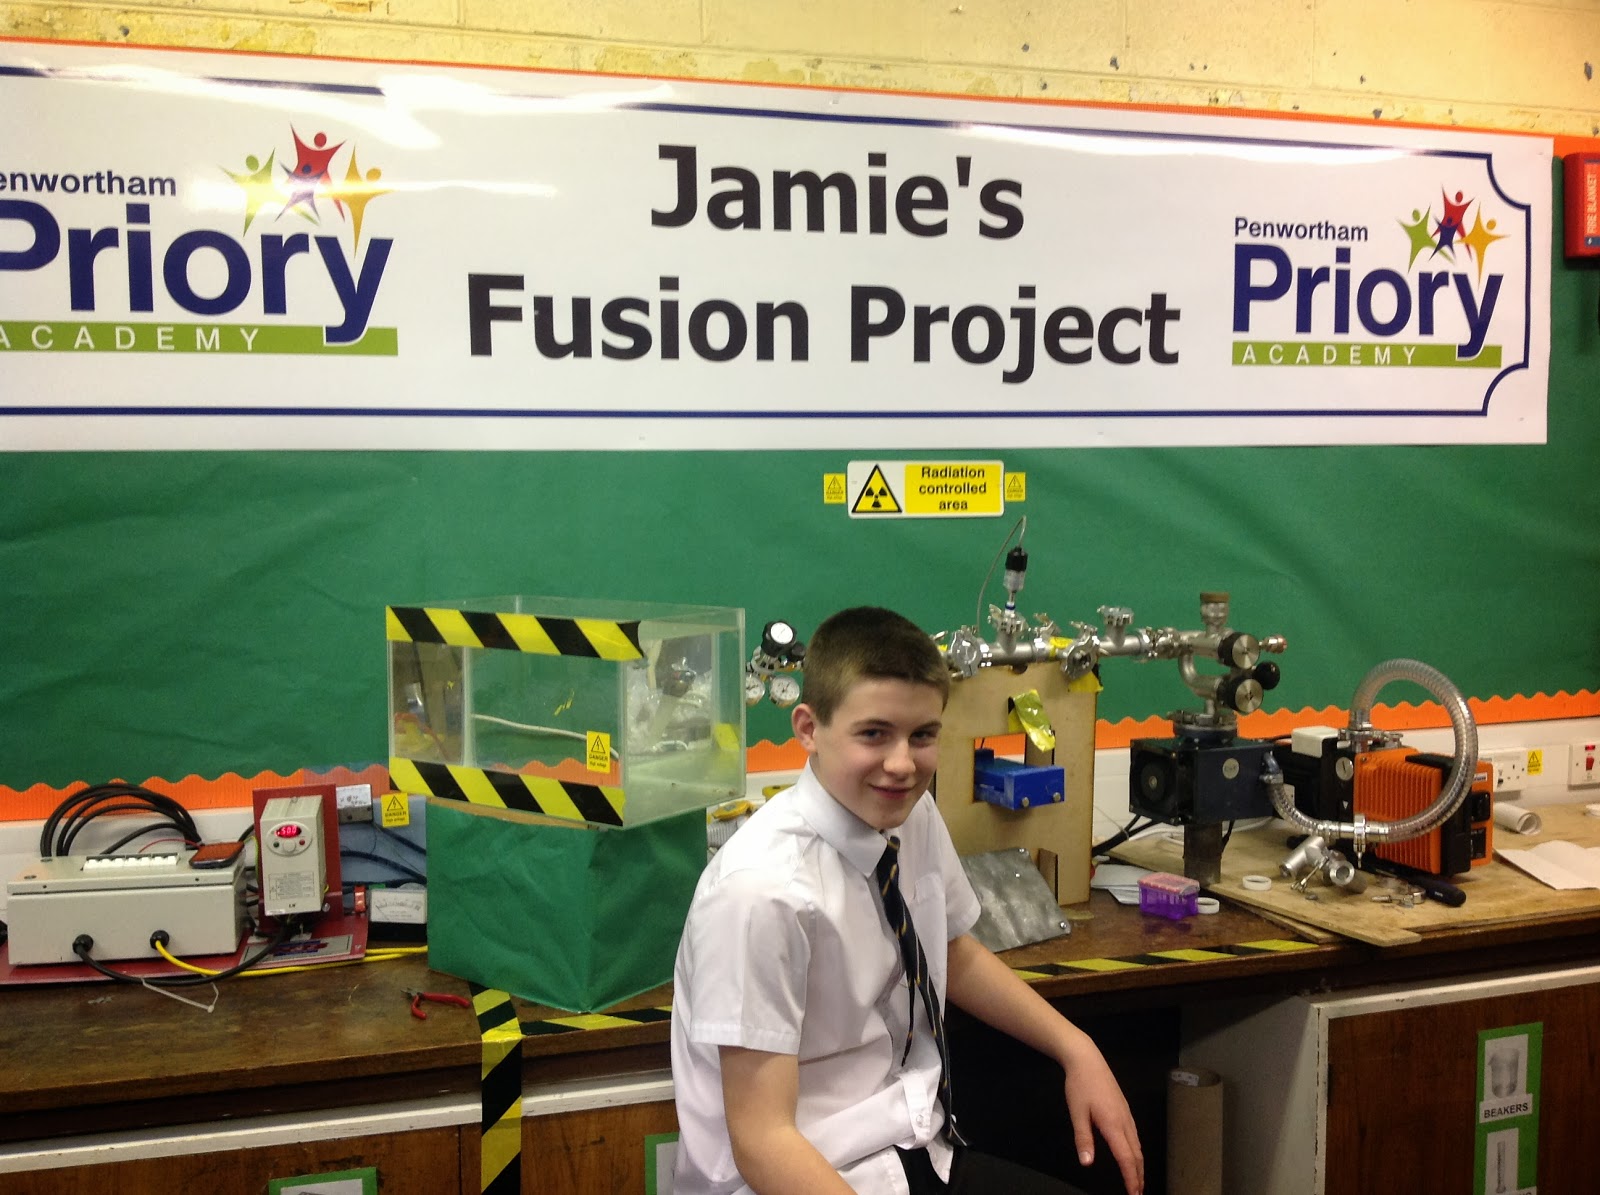 13-Year-Old Builds Nuclear Reactor, Becomes Youngest Fusioneer Ever